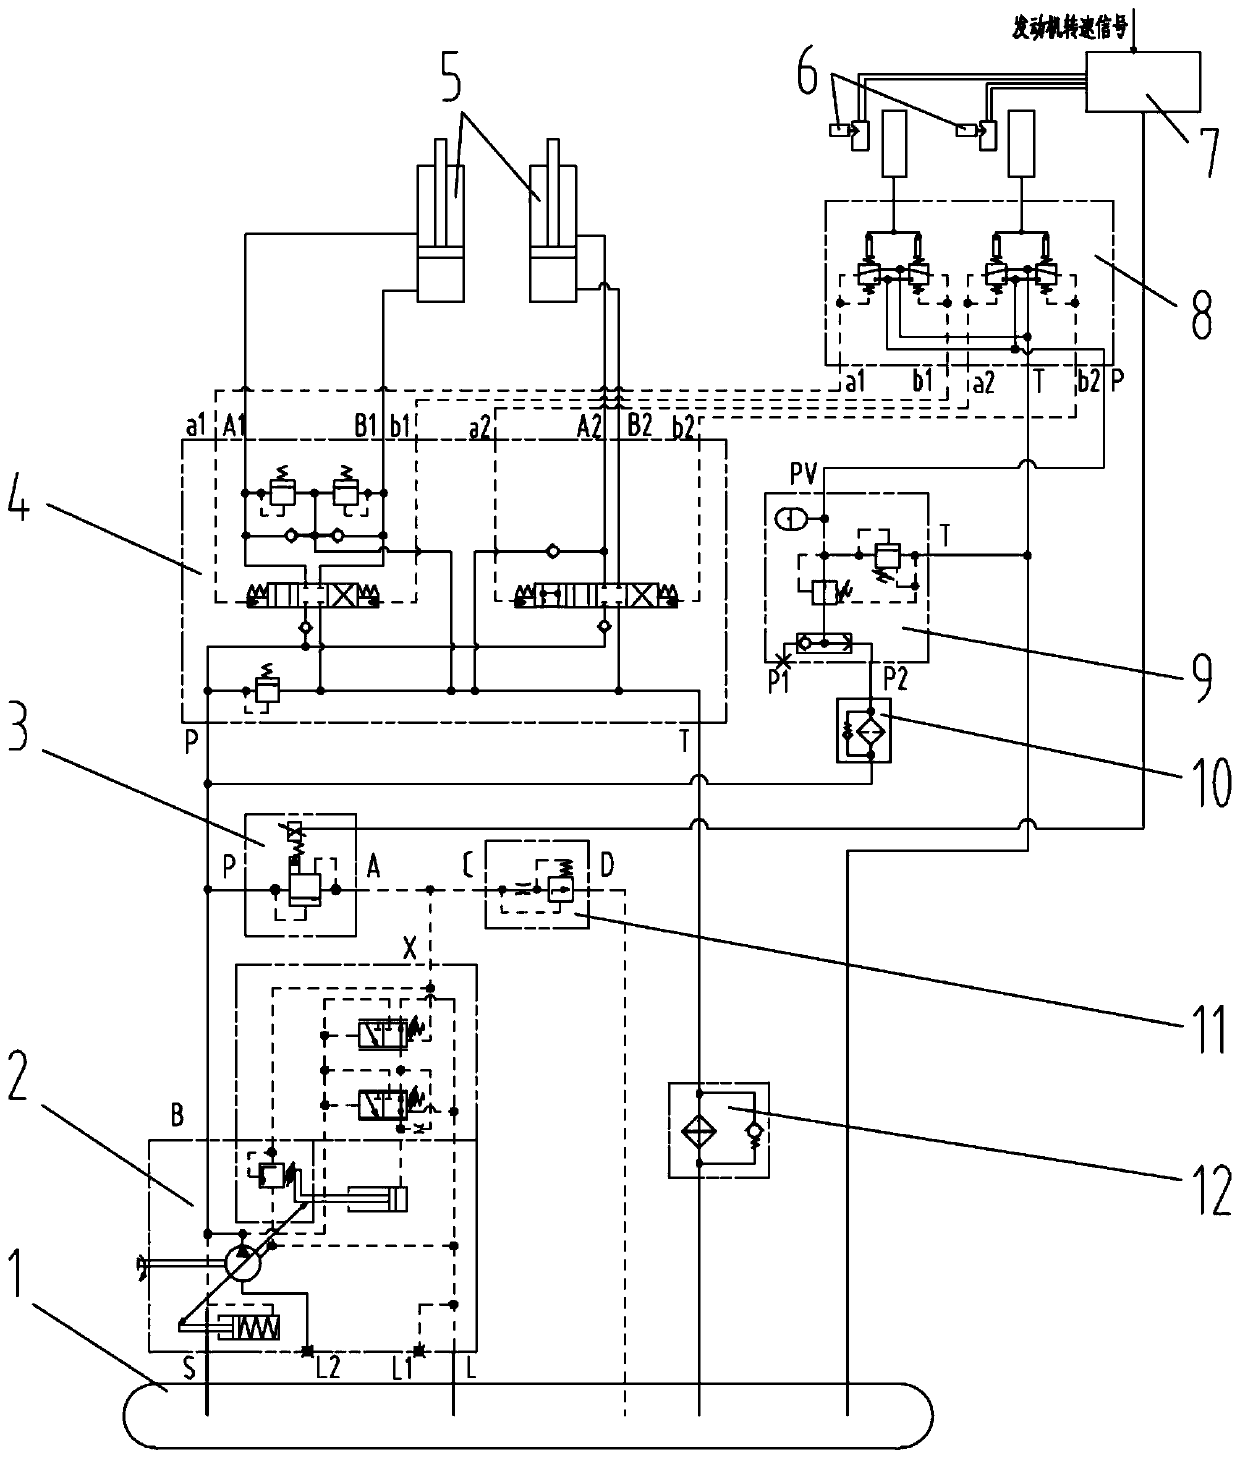 Variable hydraulic system, pump output flow control method, construction machinery